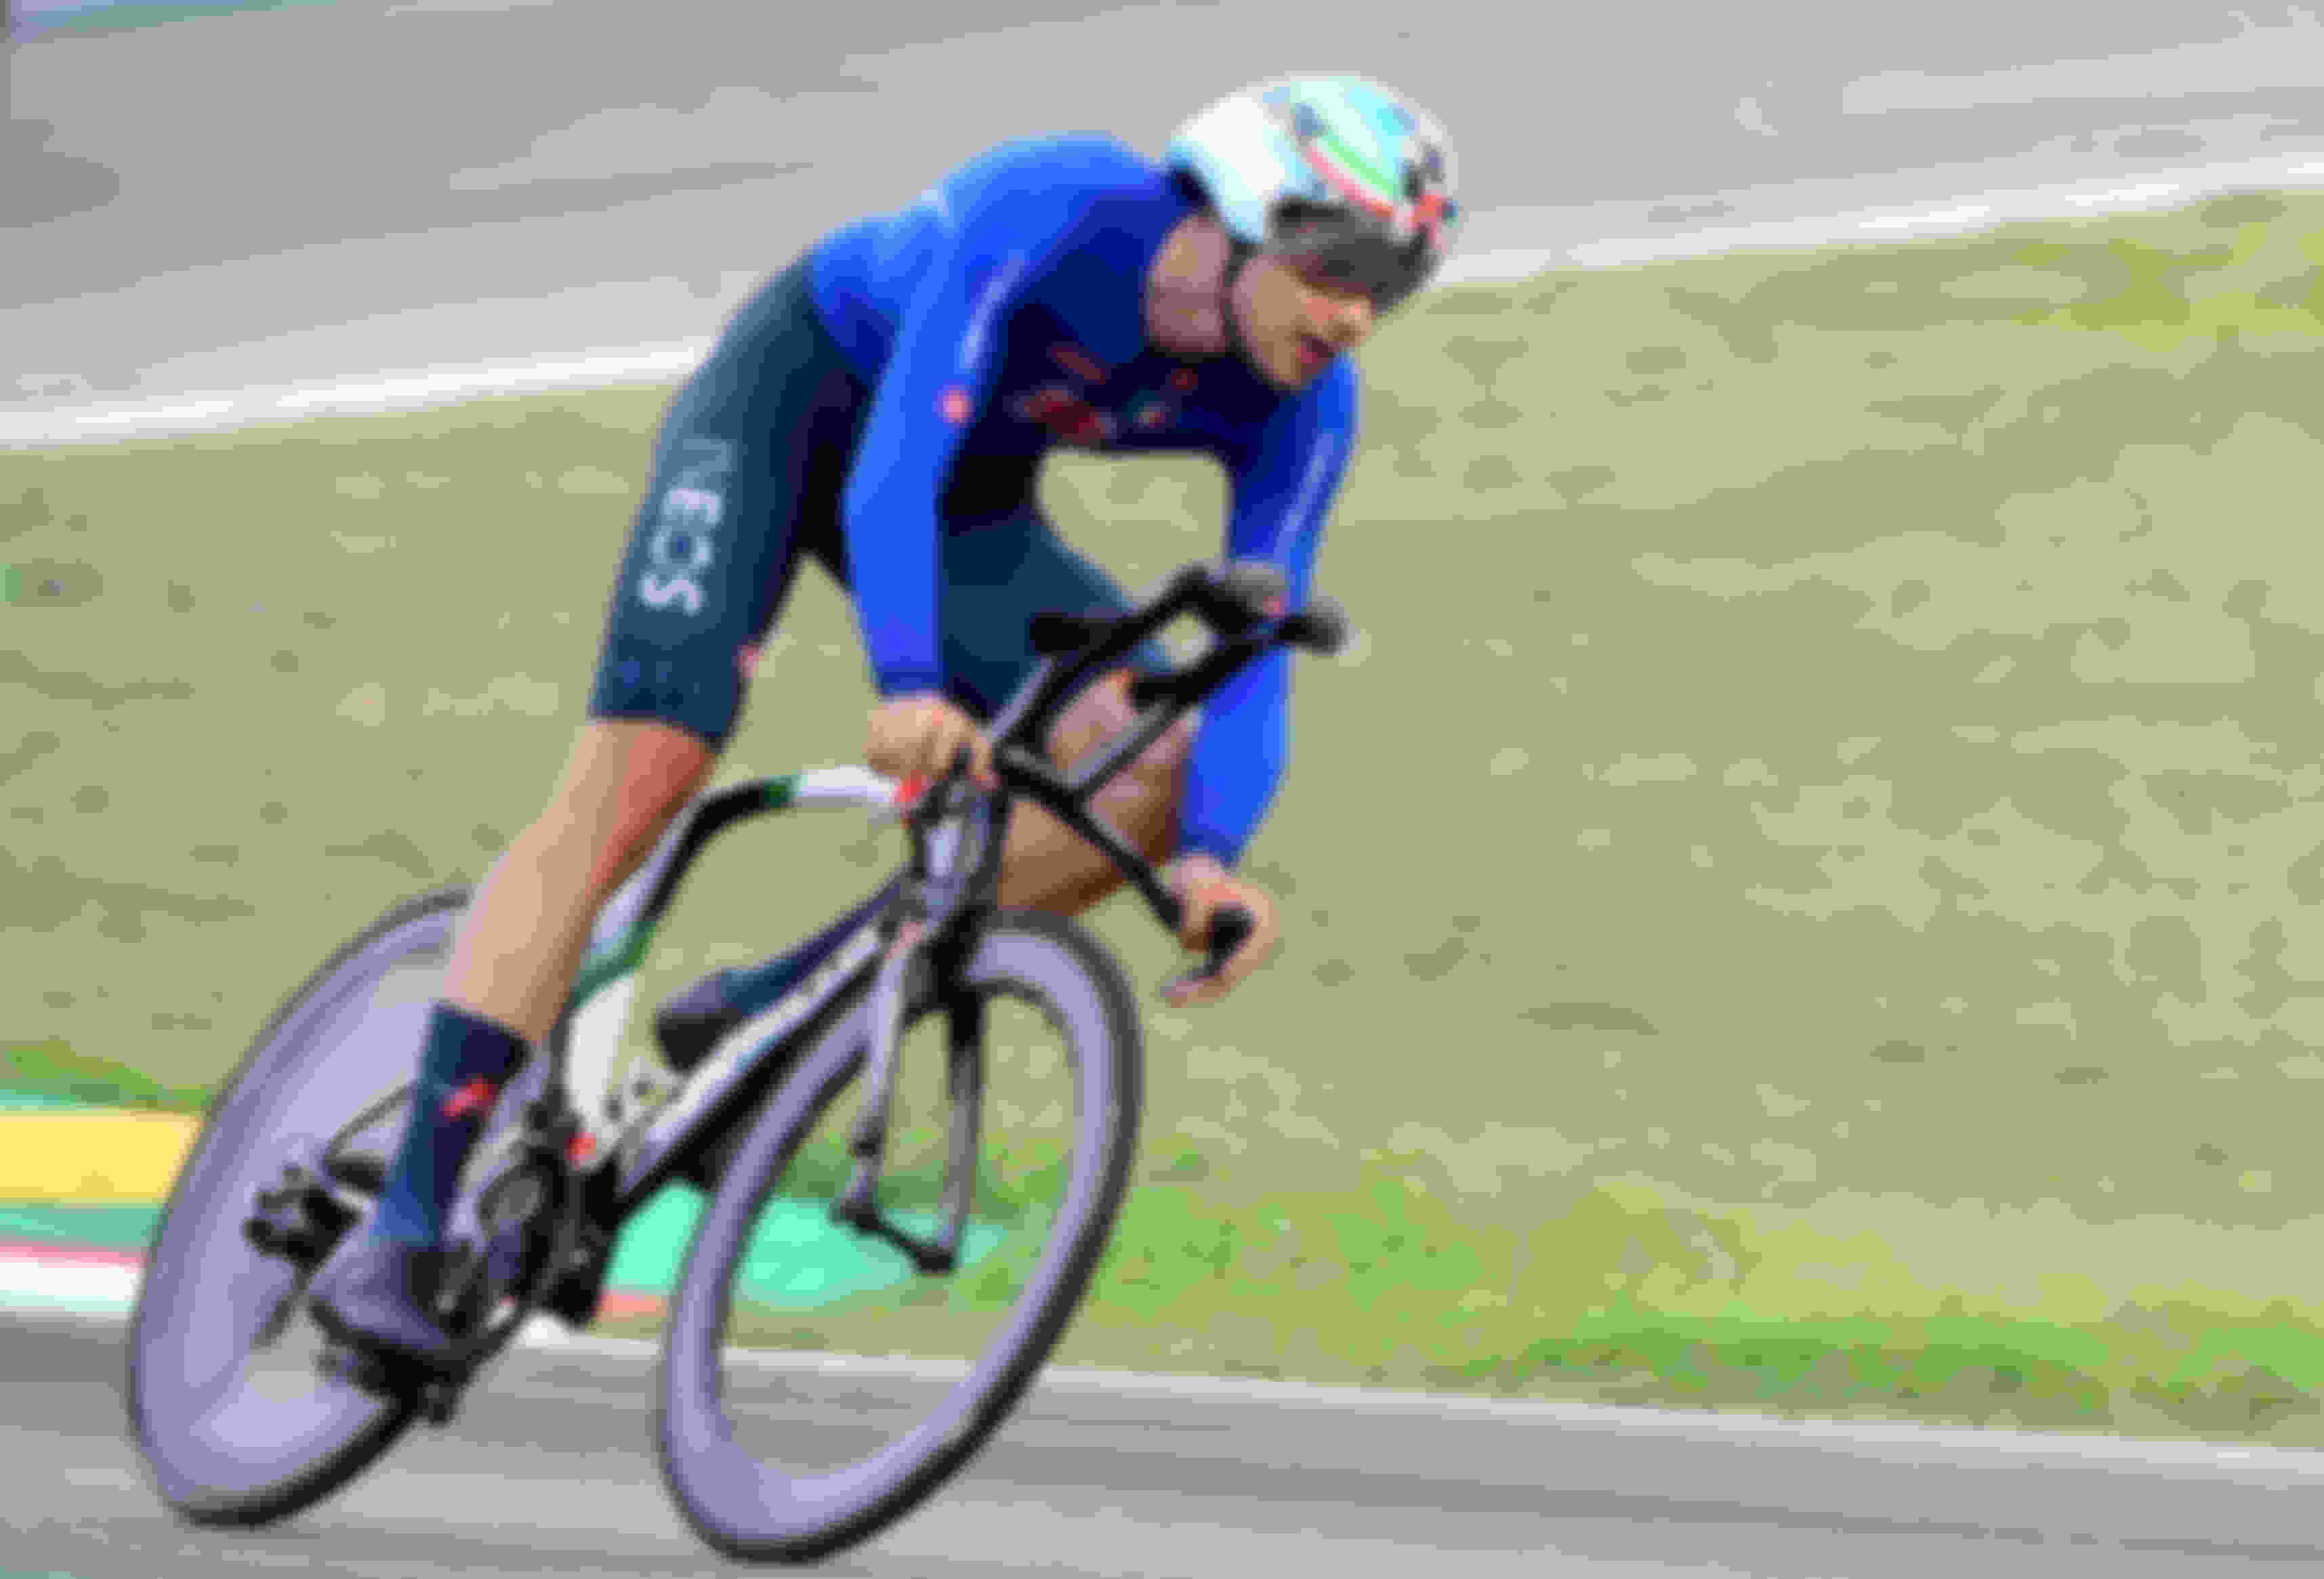 Filippo Ganna on his way to time trial gold at the 2020 Road World Championships in Imola